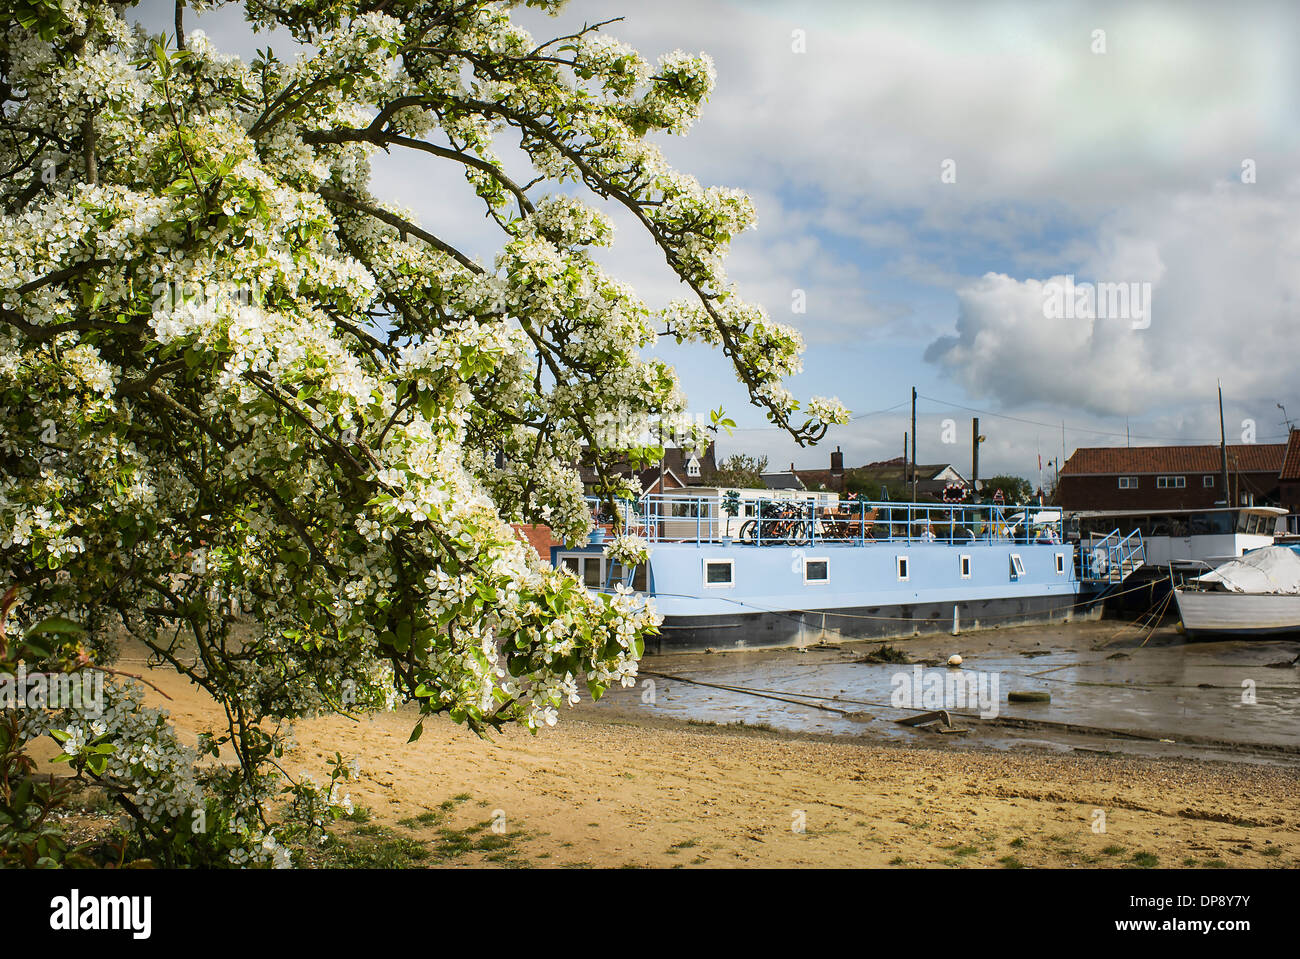 Spring blossom on a tree by Woodbridge tidal harbour on River Deben in Suffolk UK Stock Photo